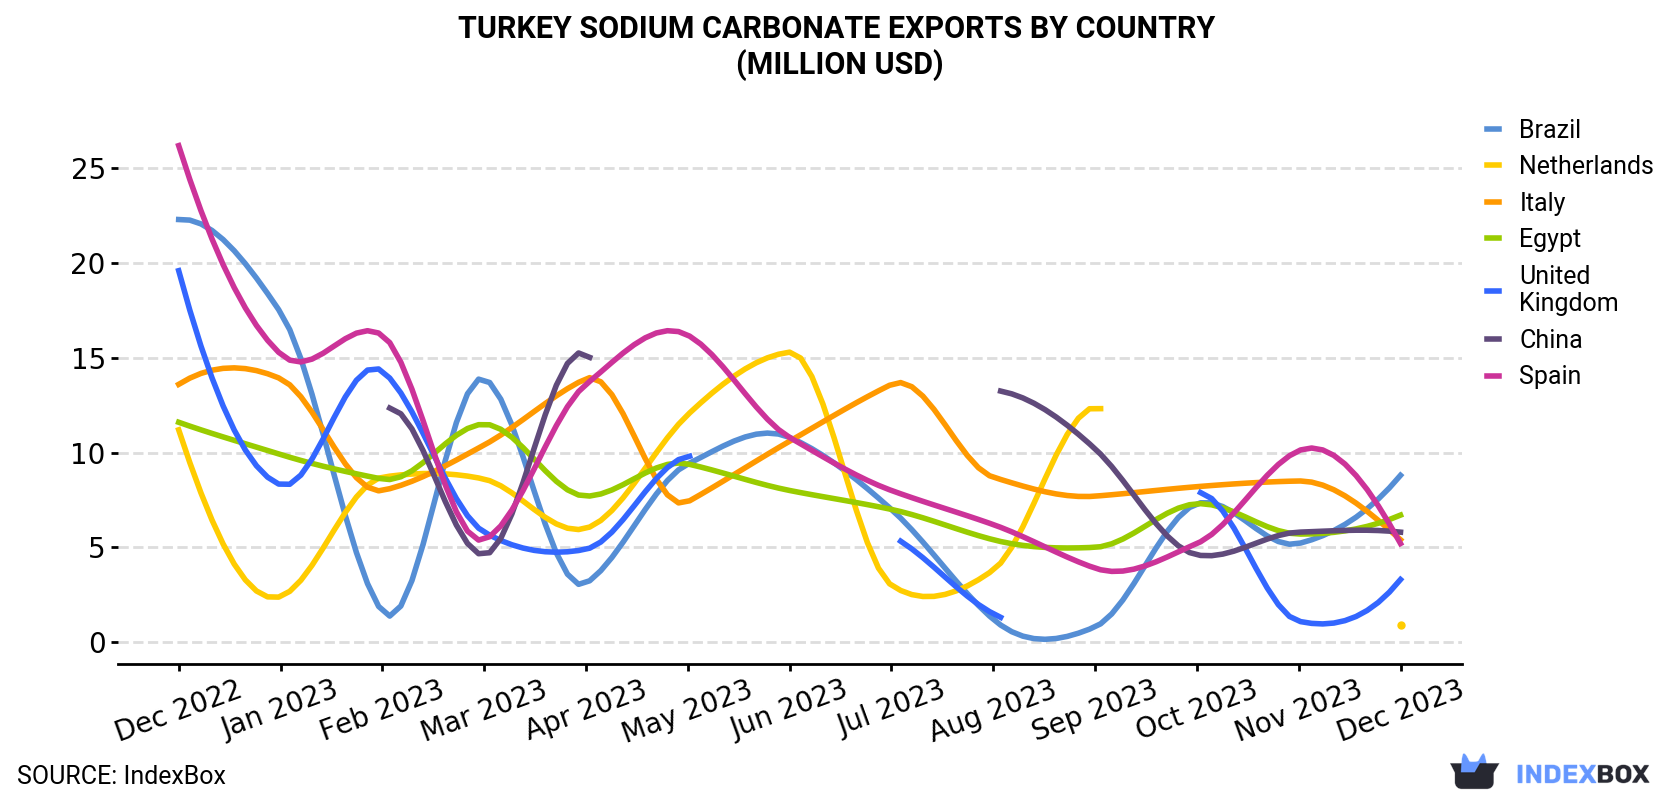 Turkey Sodium Carbonate Exports By Country (Million USD)